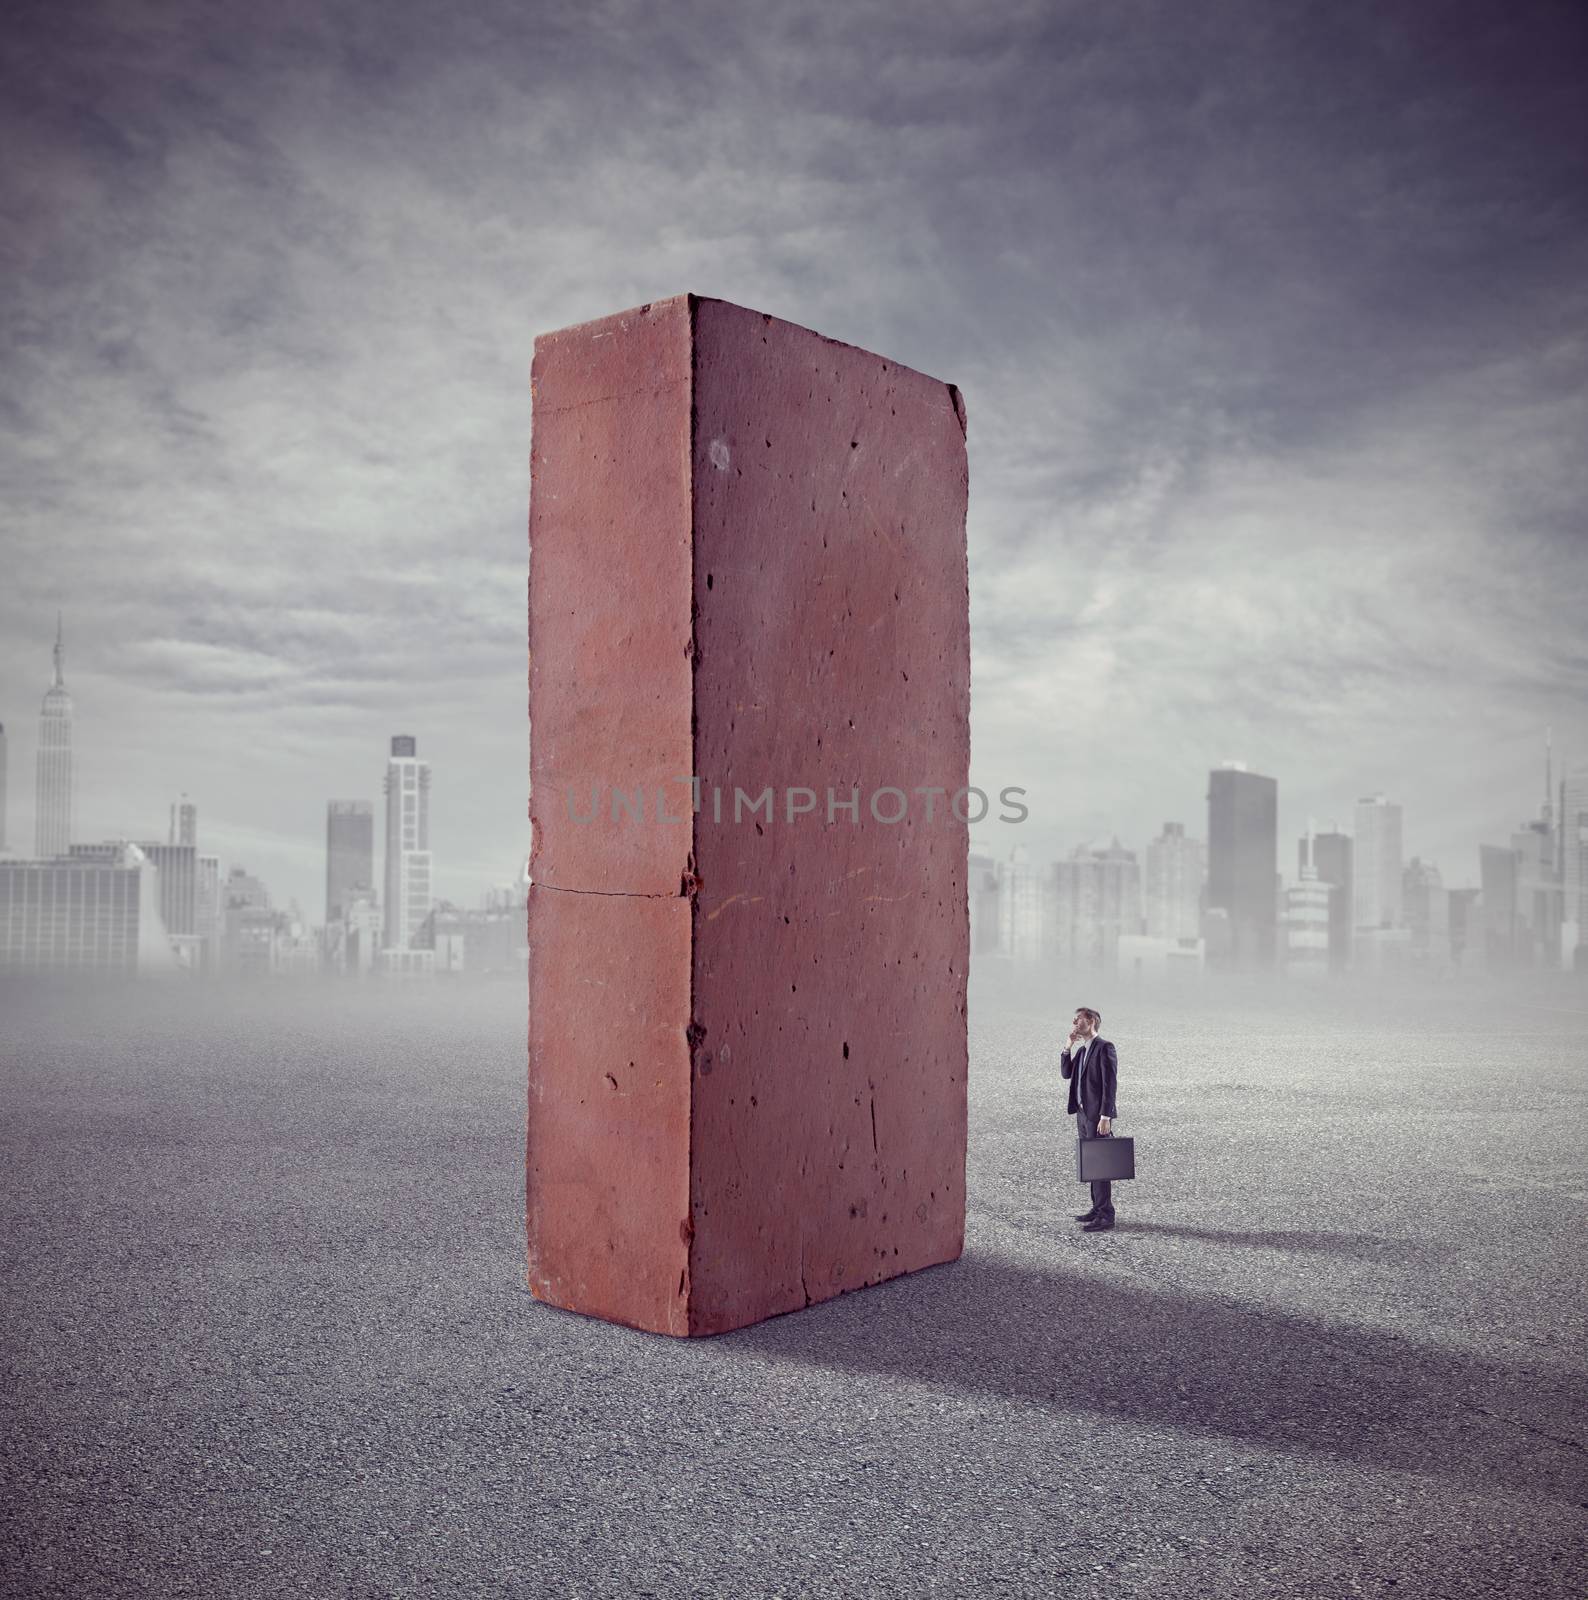 Businessman staring at huge standing brick with skyline and clouds on background.